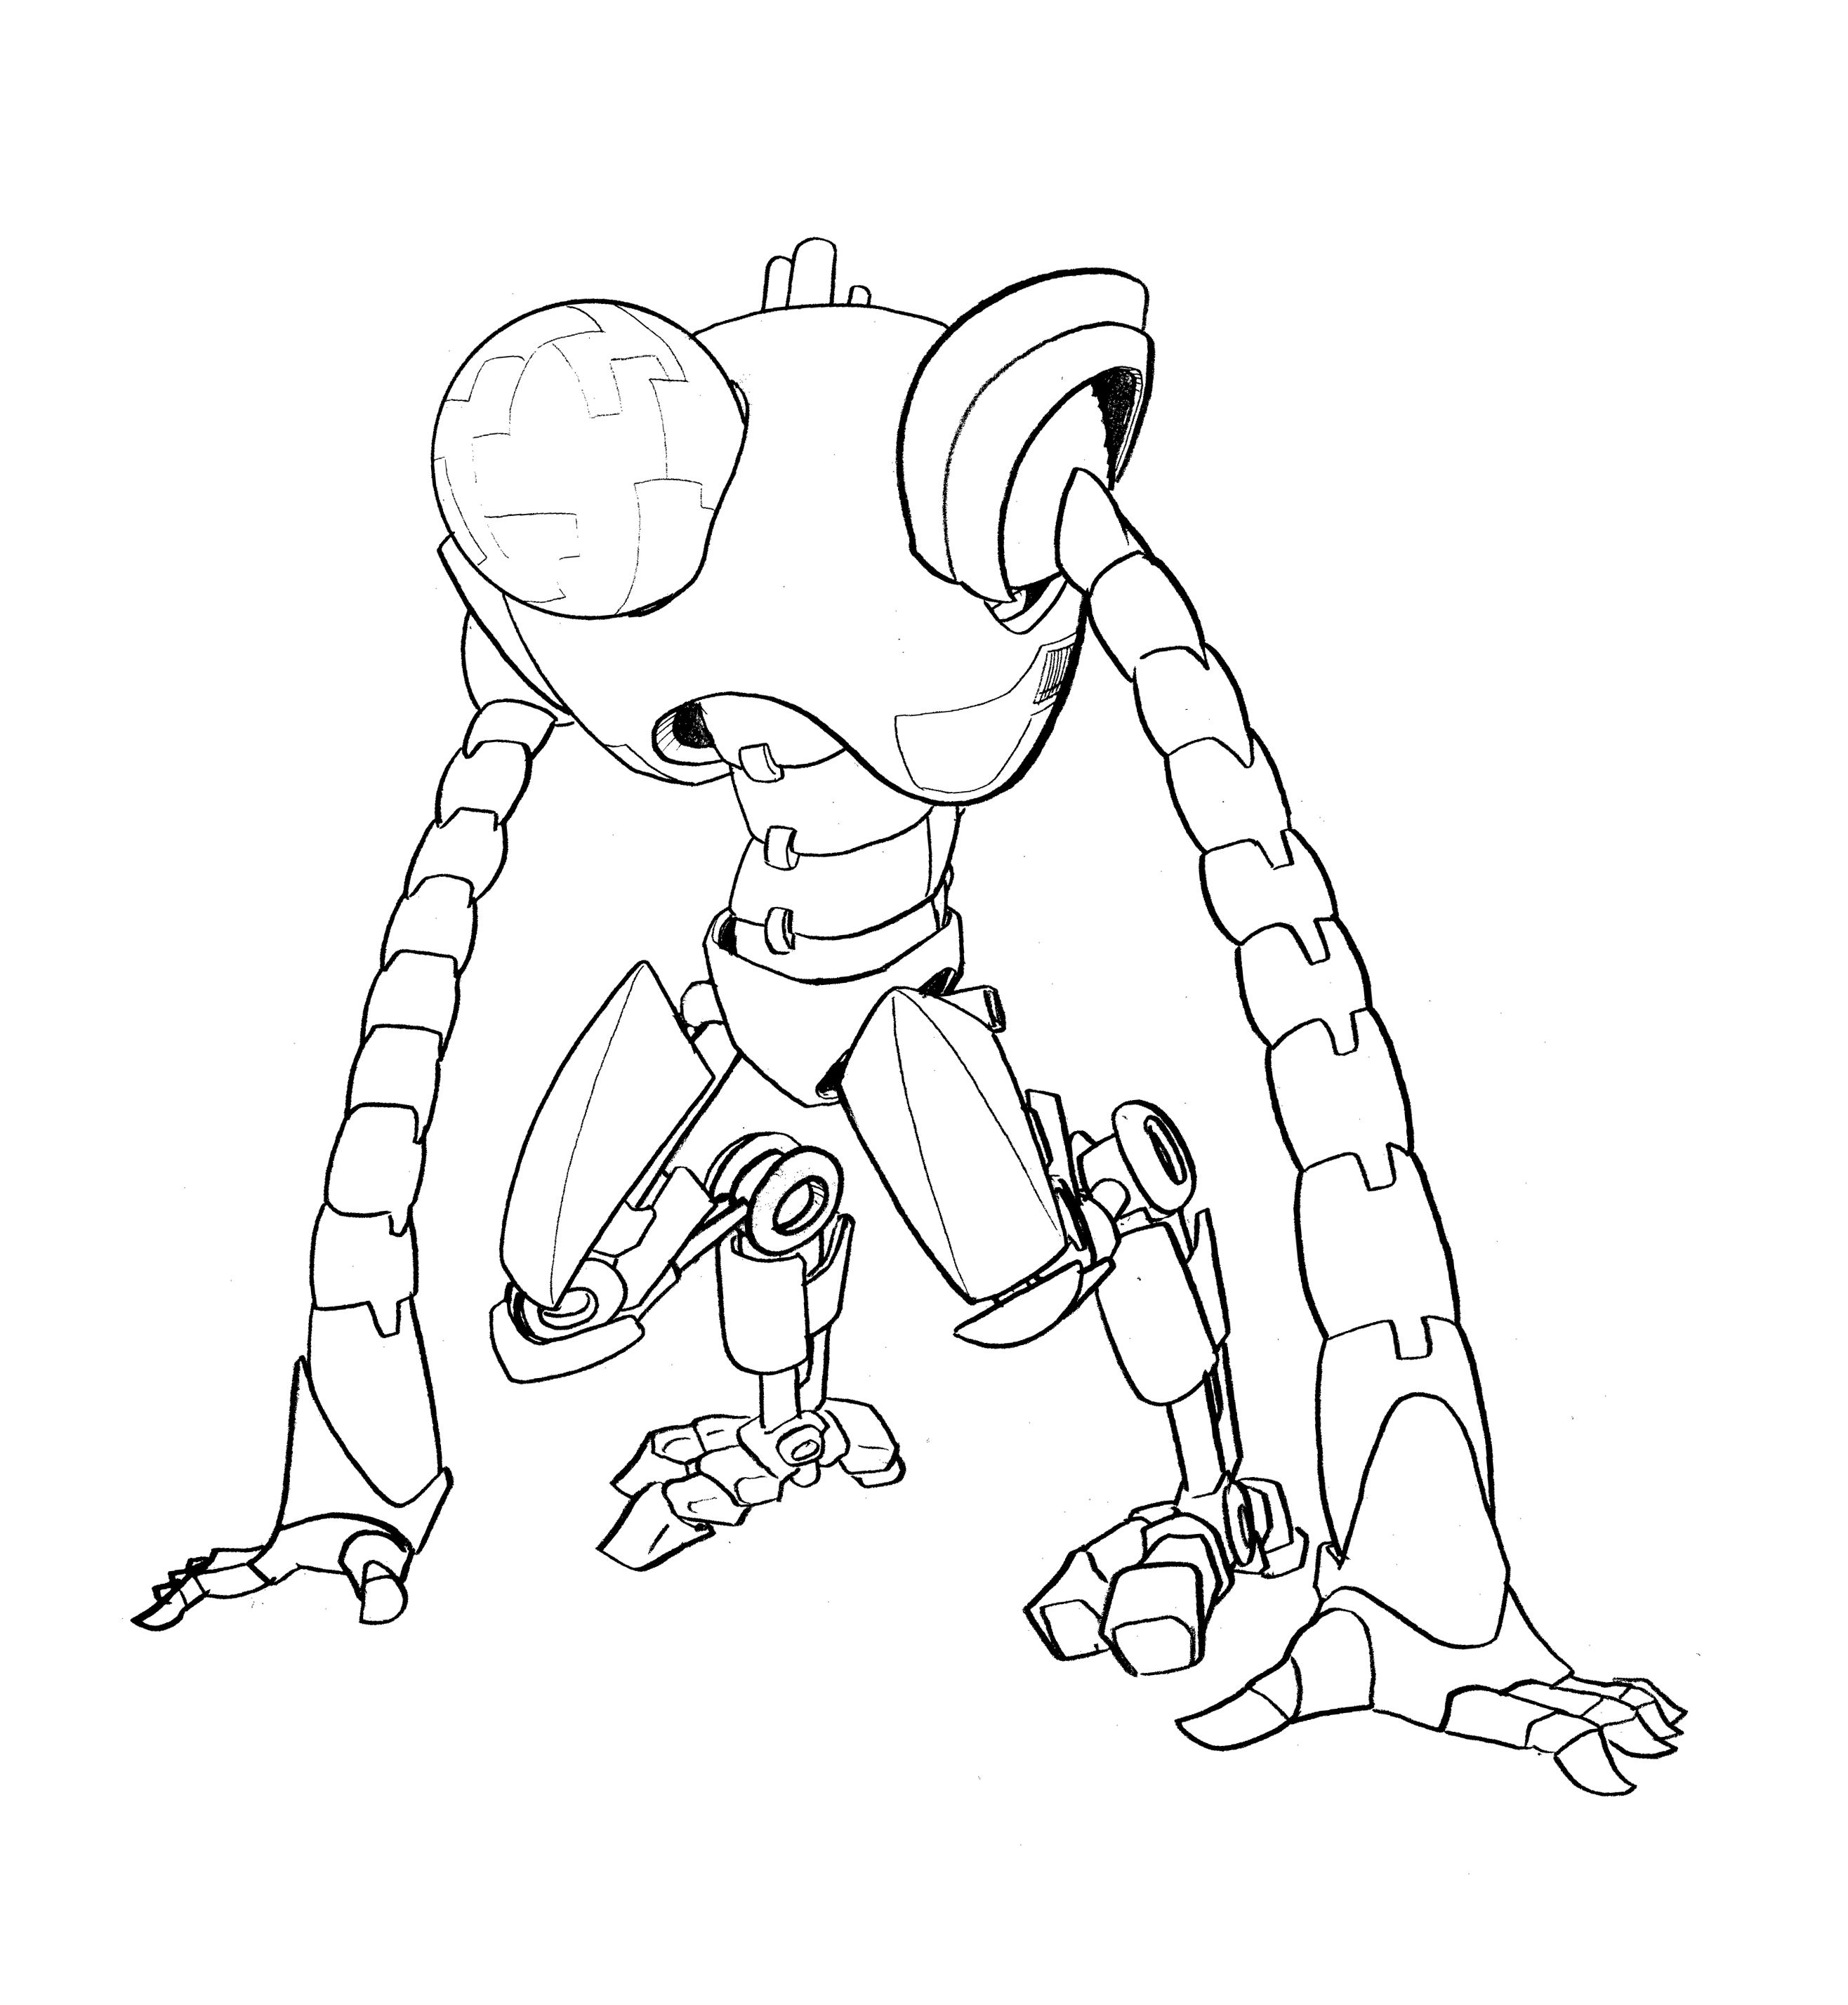 Anime Awesome Robots Drawings Sketch Coloring Page